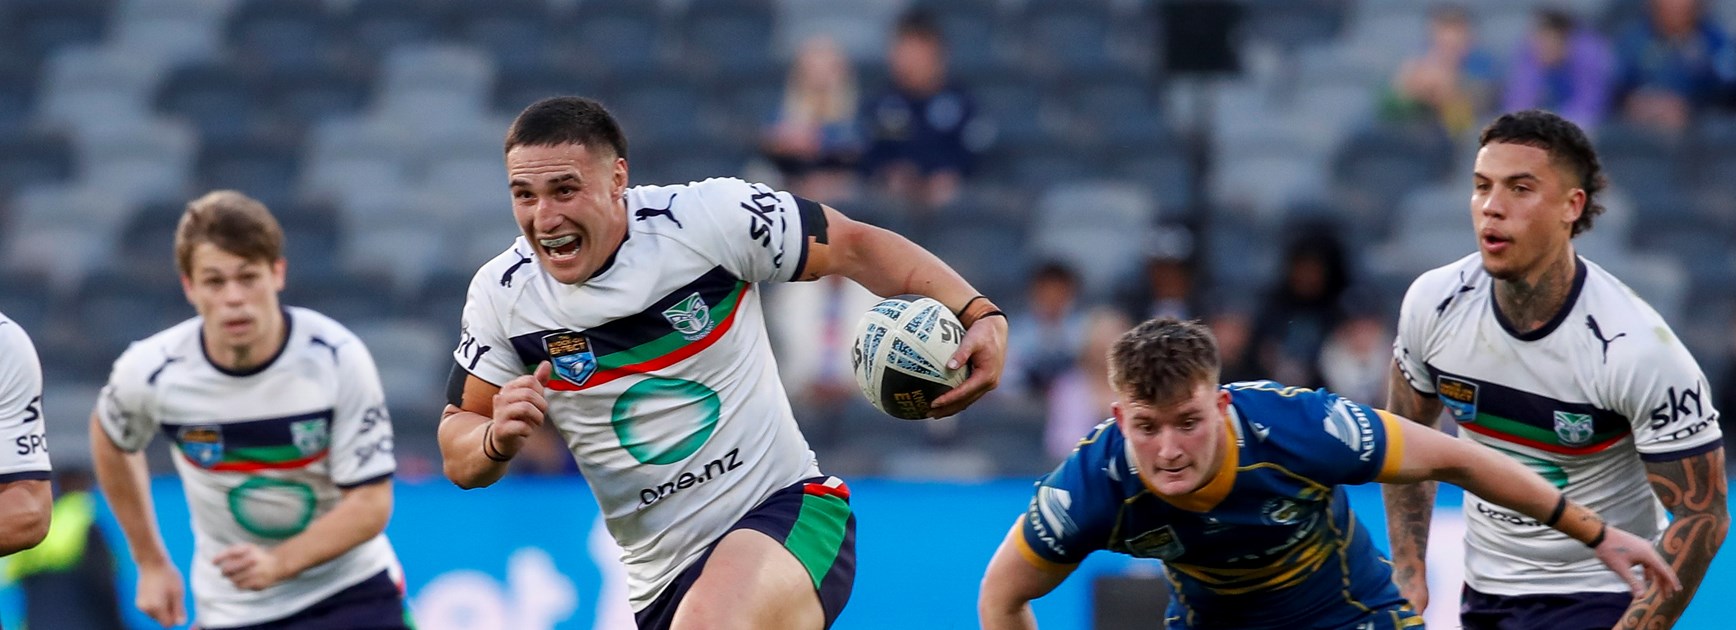 Rd 19 NSW Cup Match Report: Going back-to-back